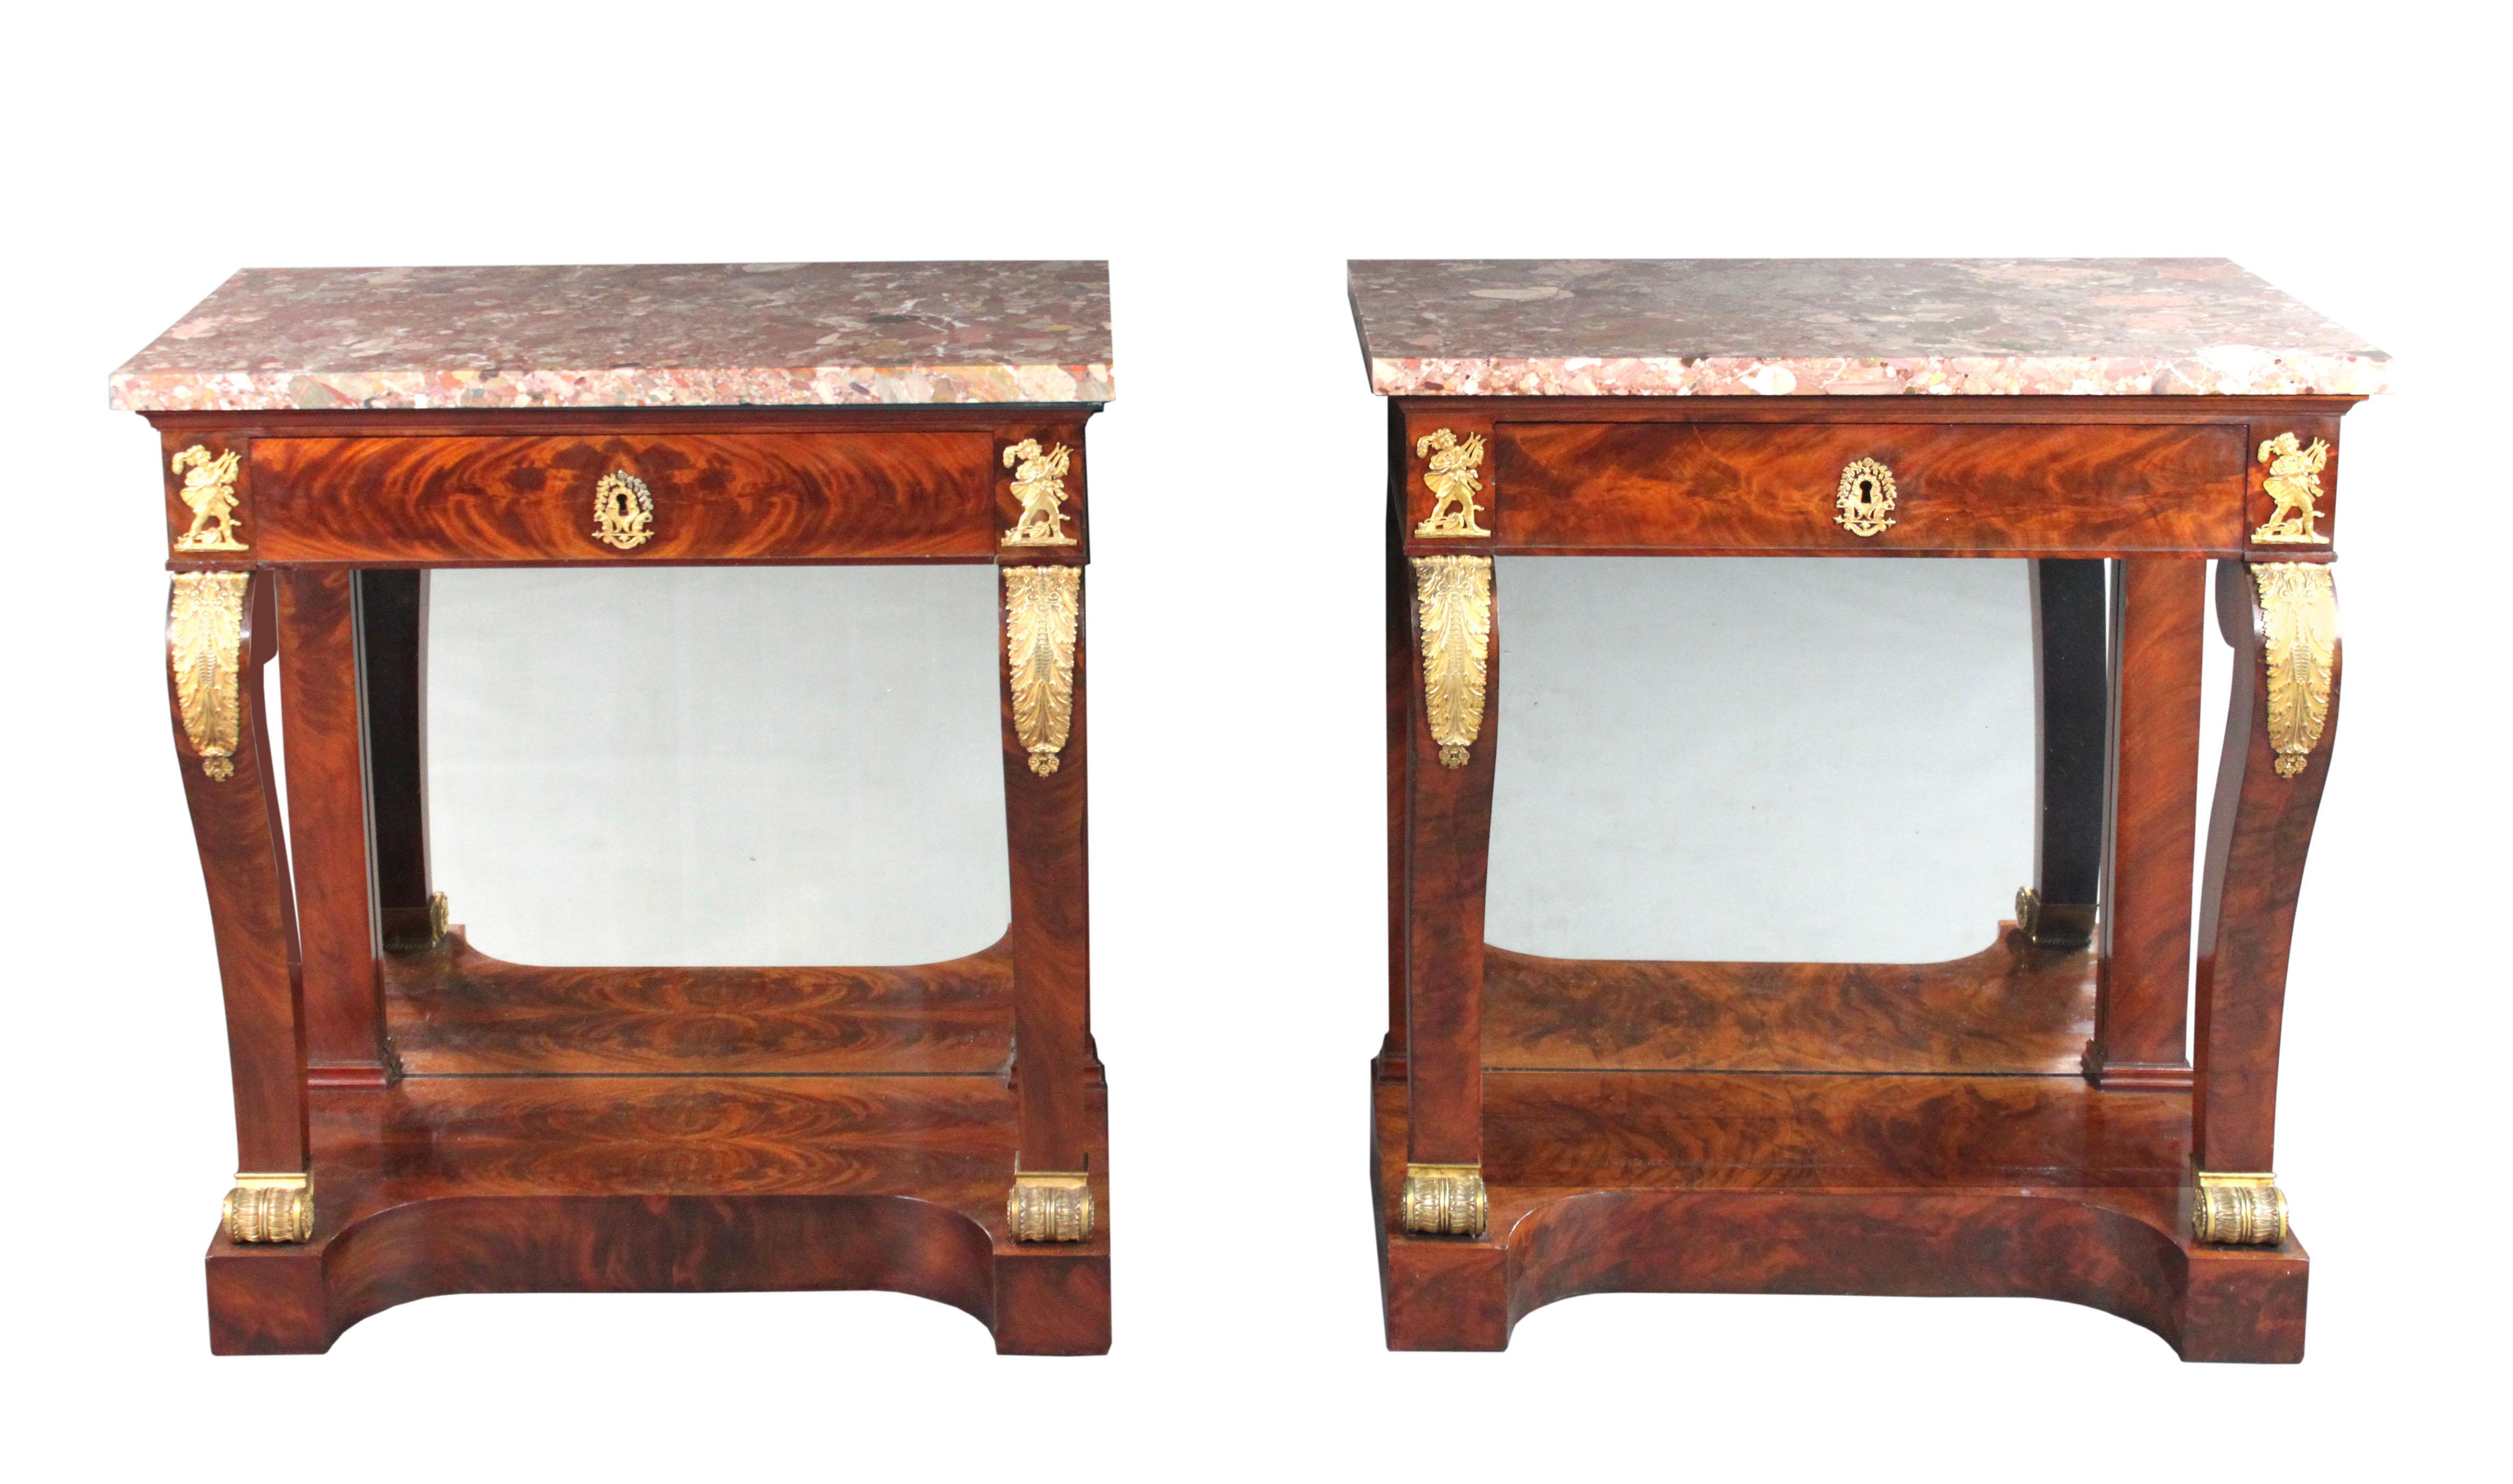 Pair of Empire console tables
A fine pair of Empire mahogany console tables with ormolu mounts of a lute player with other instruments at his feet, a leaf motif on the top of the legs and a very charming escutcheon of two squirrels; the tables have